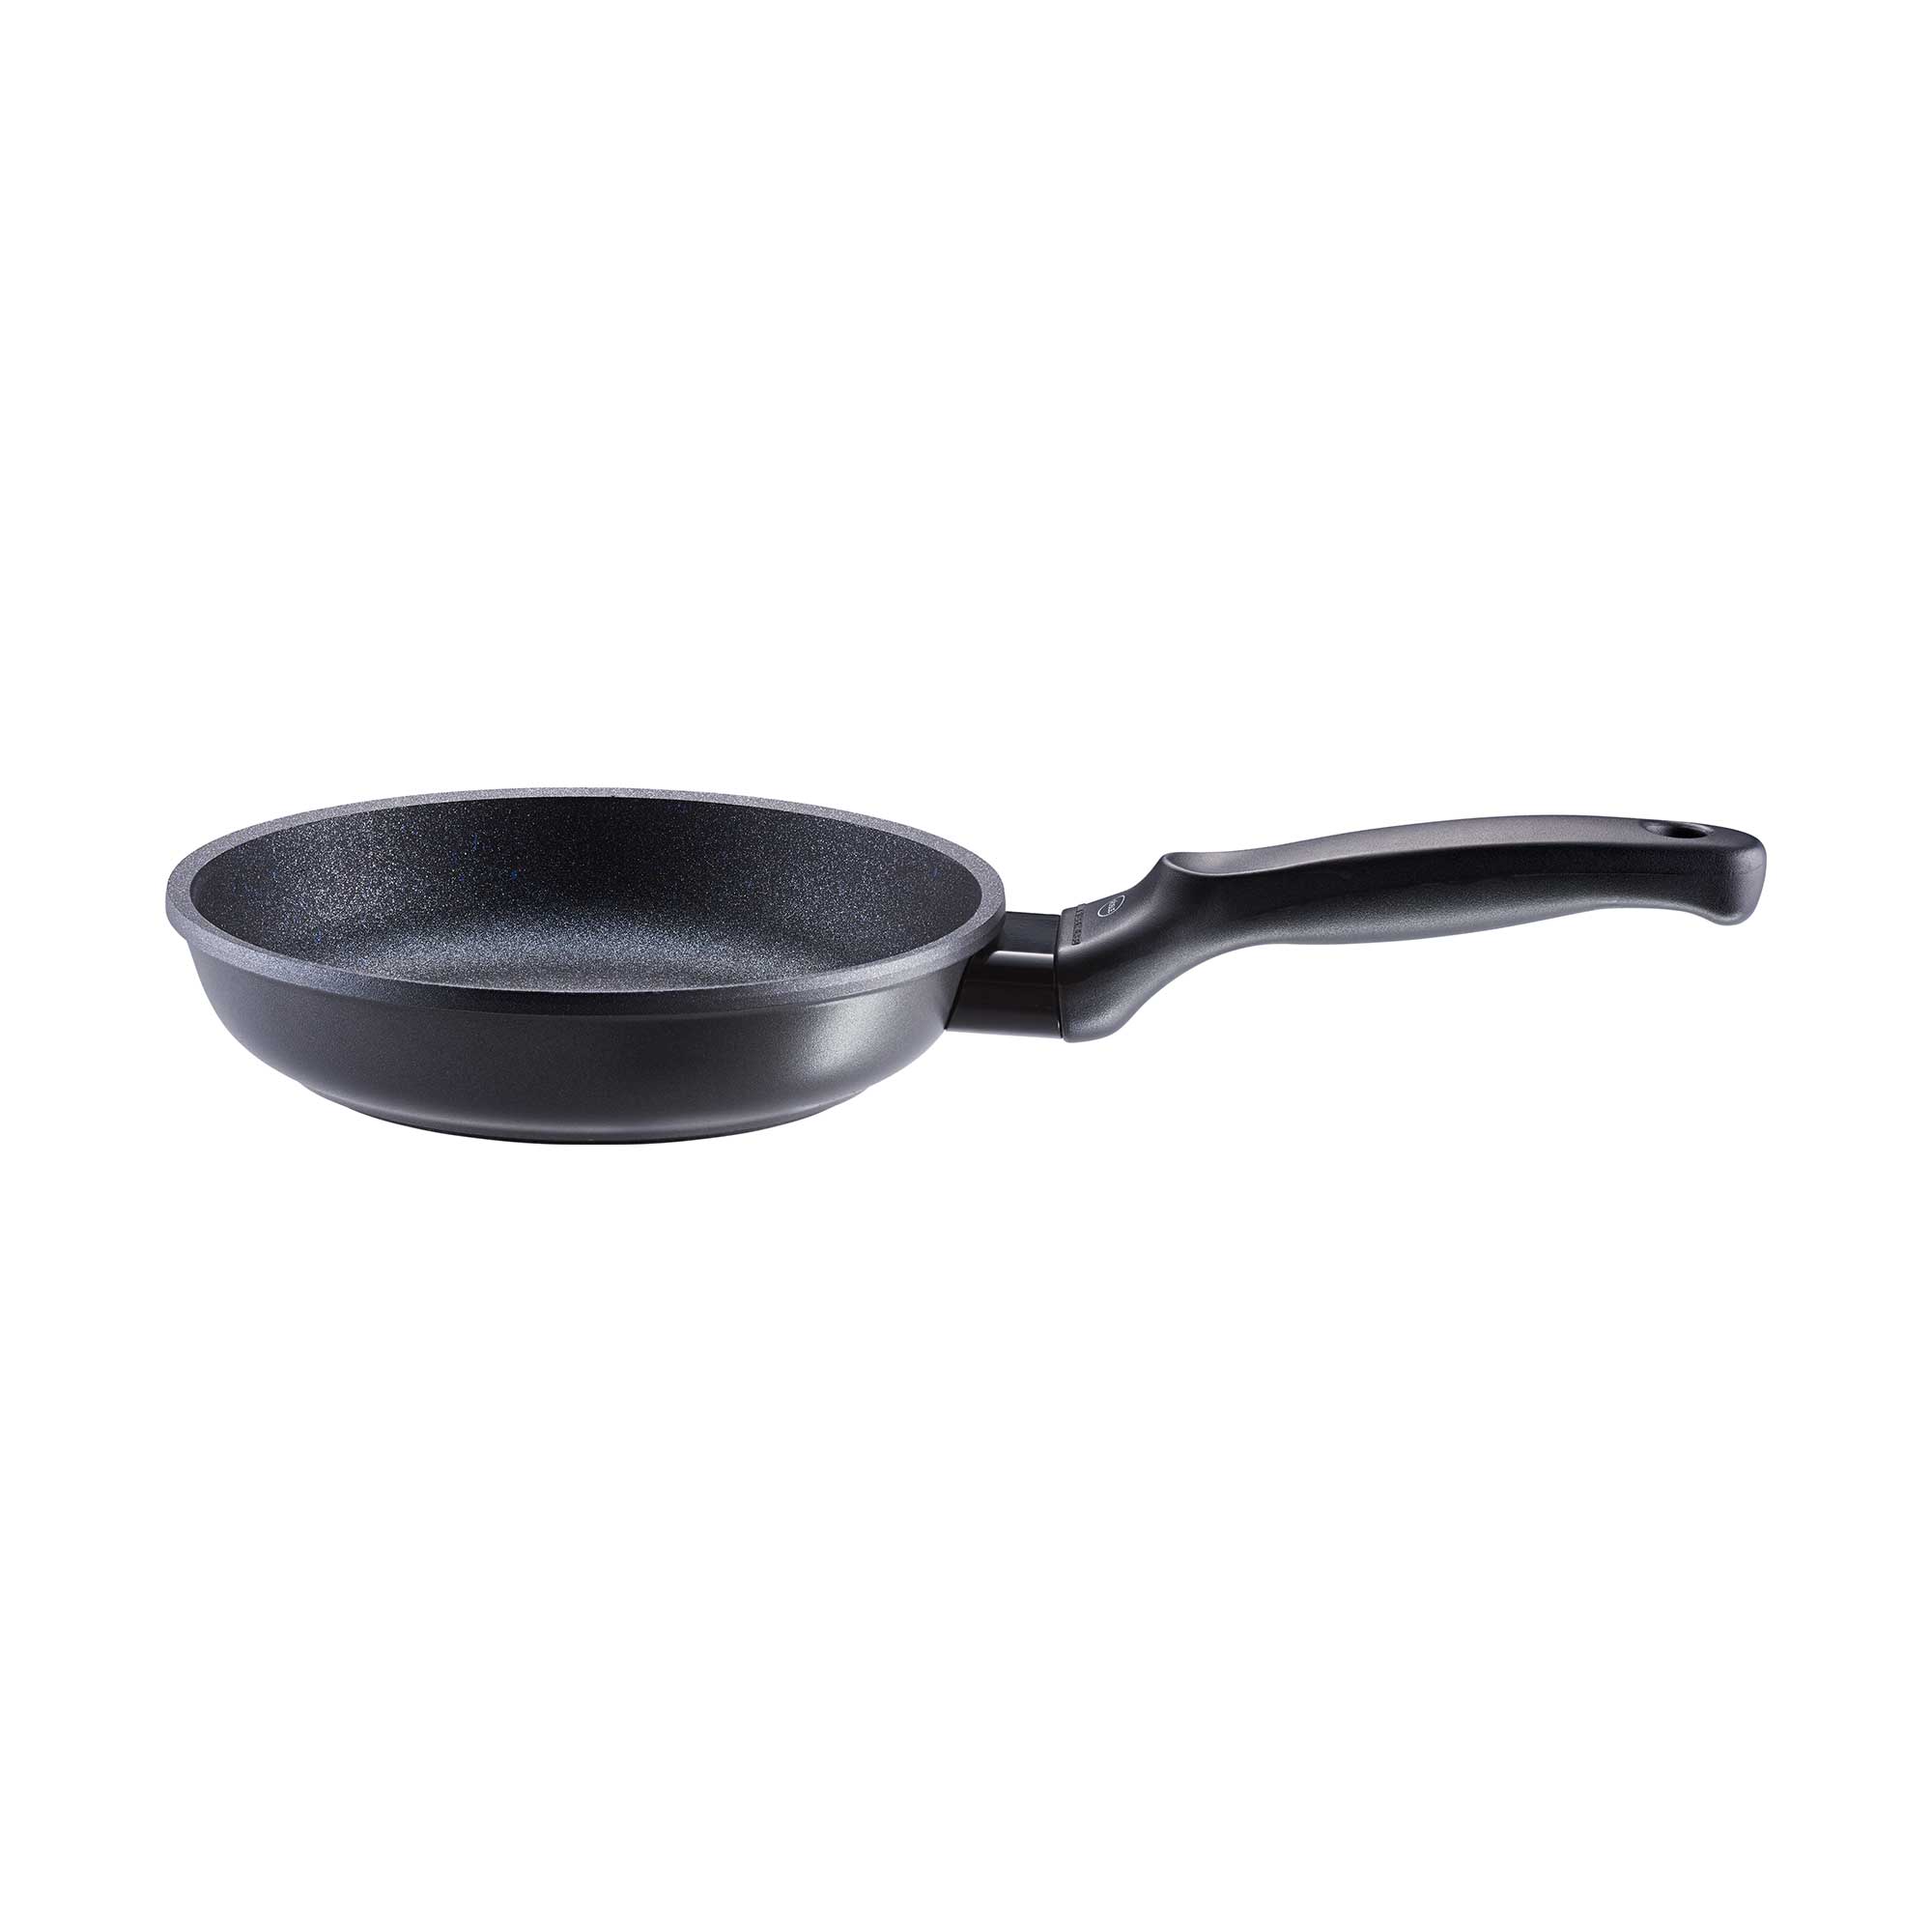 Frying Pan "Cadini" Ø 20 cm | 8.0 in. from cast aluminum with non-stick coating ProResist®